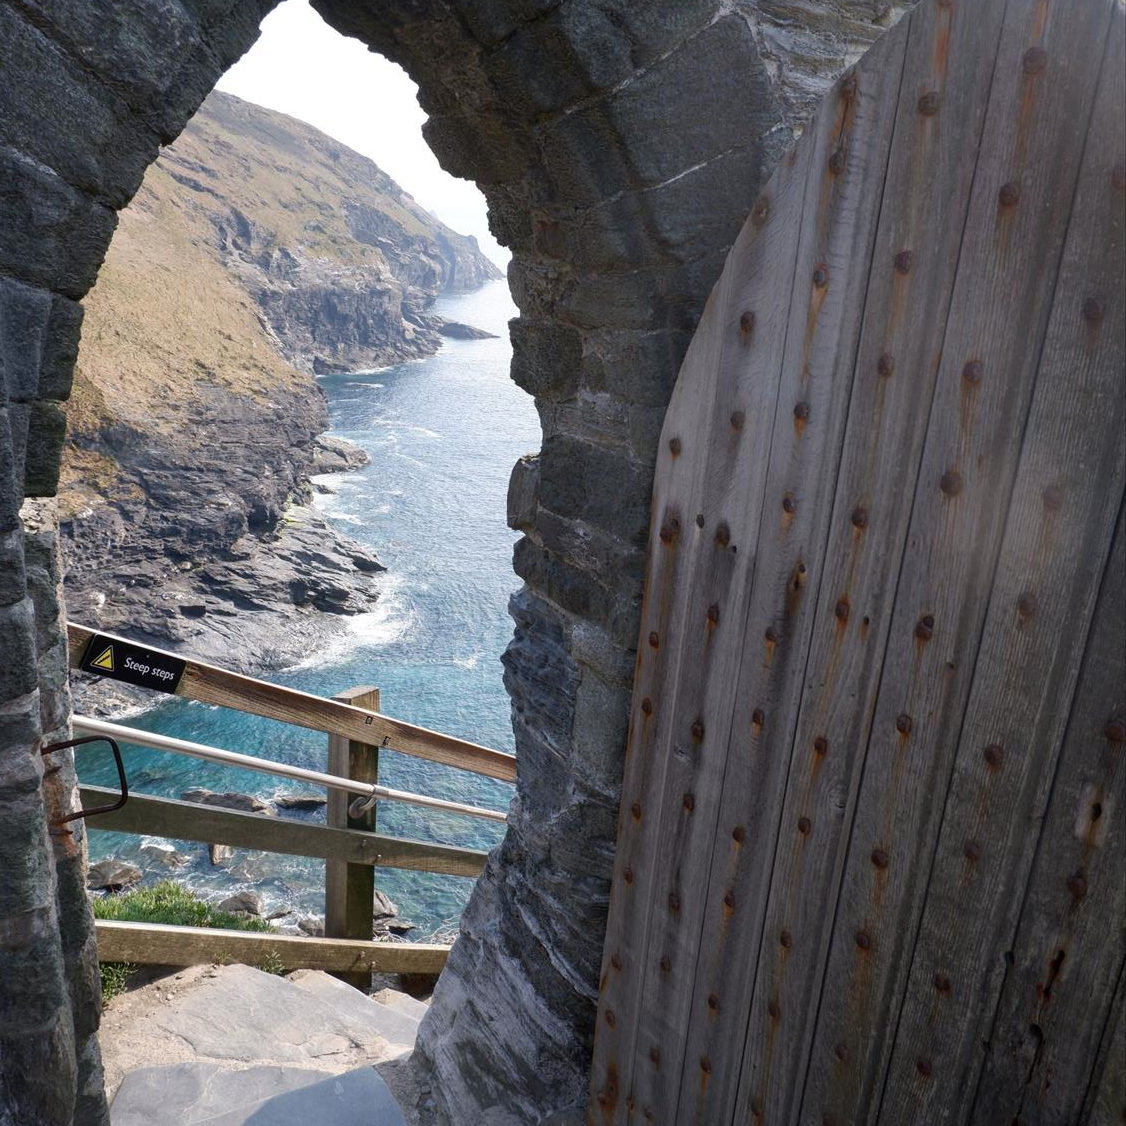 Tintagel Castle, with the heavy wooden gate open to reveal steps down to the sea